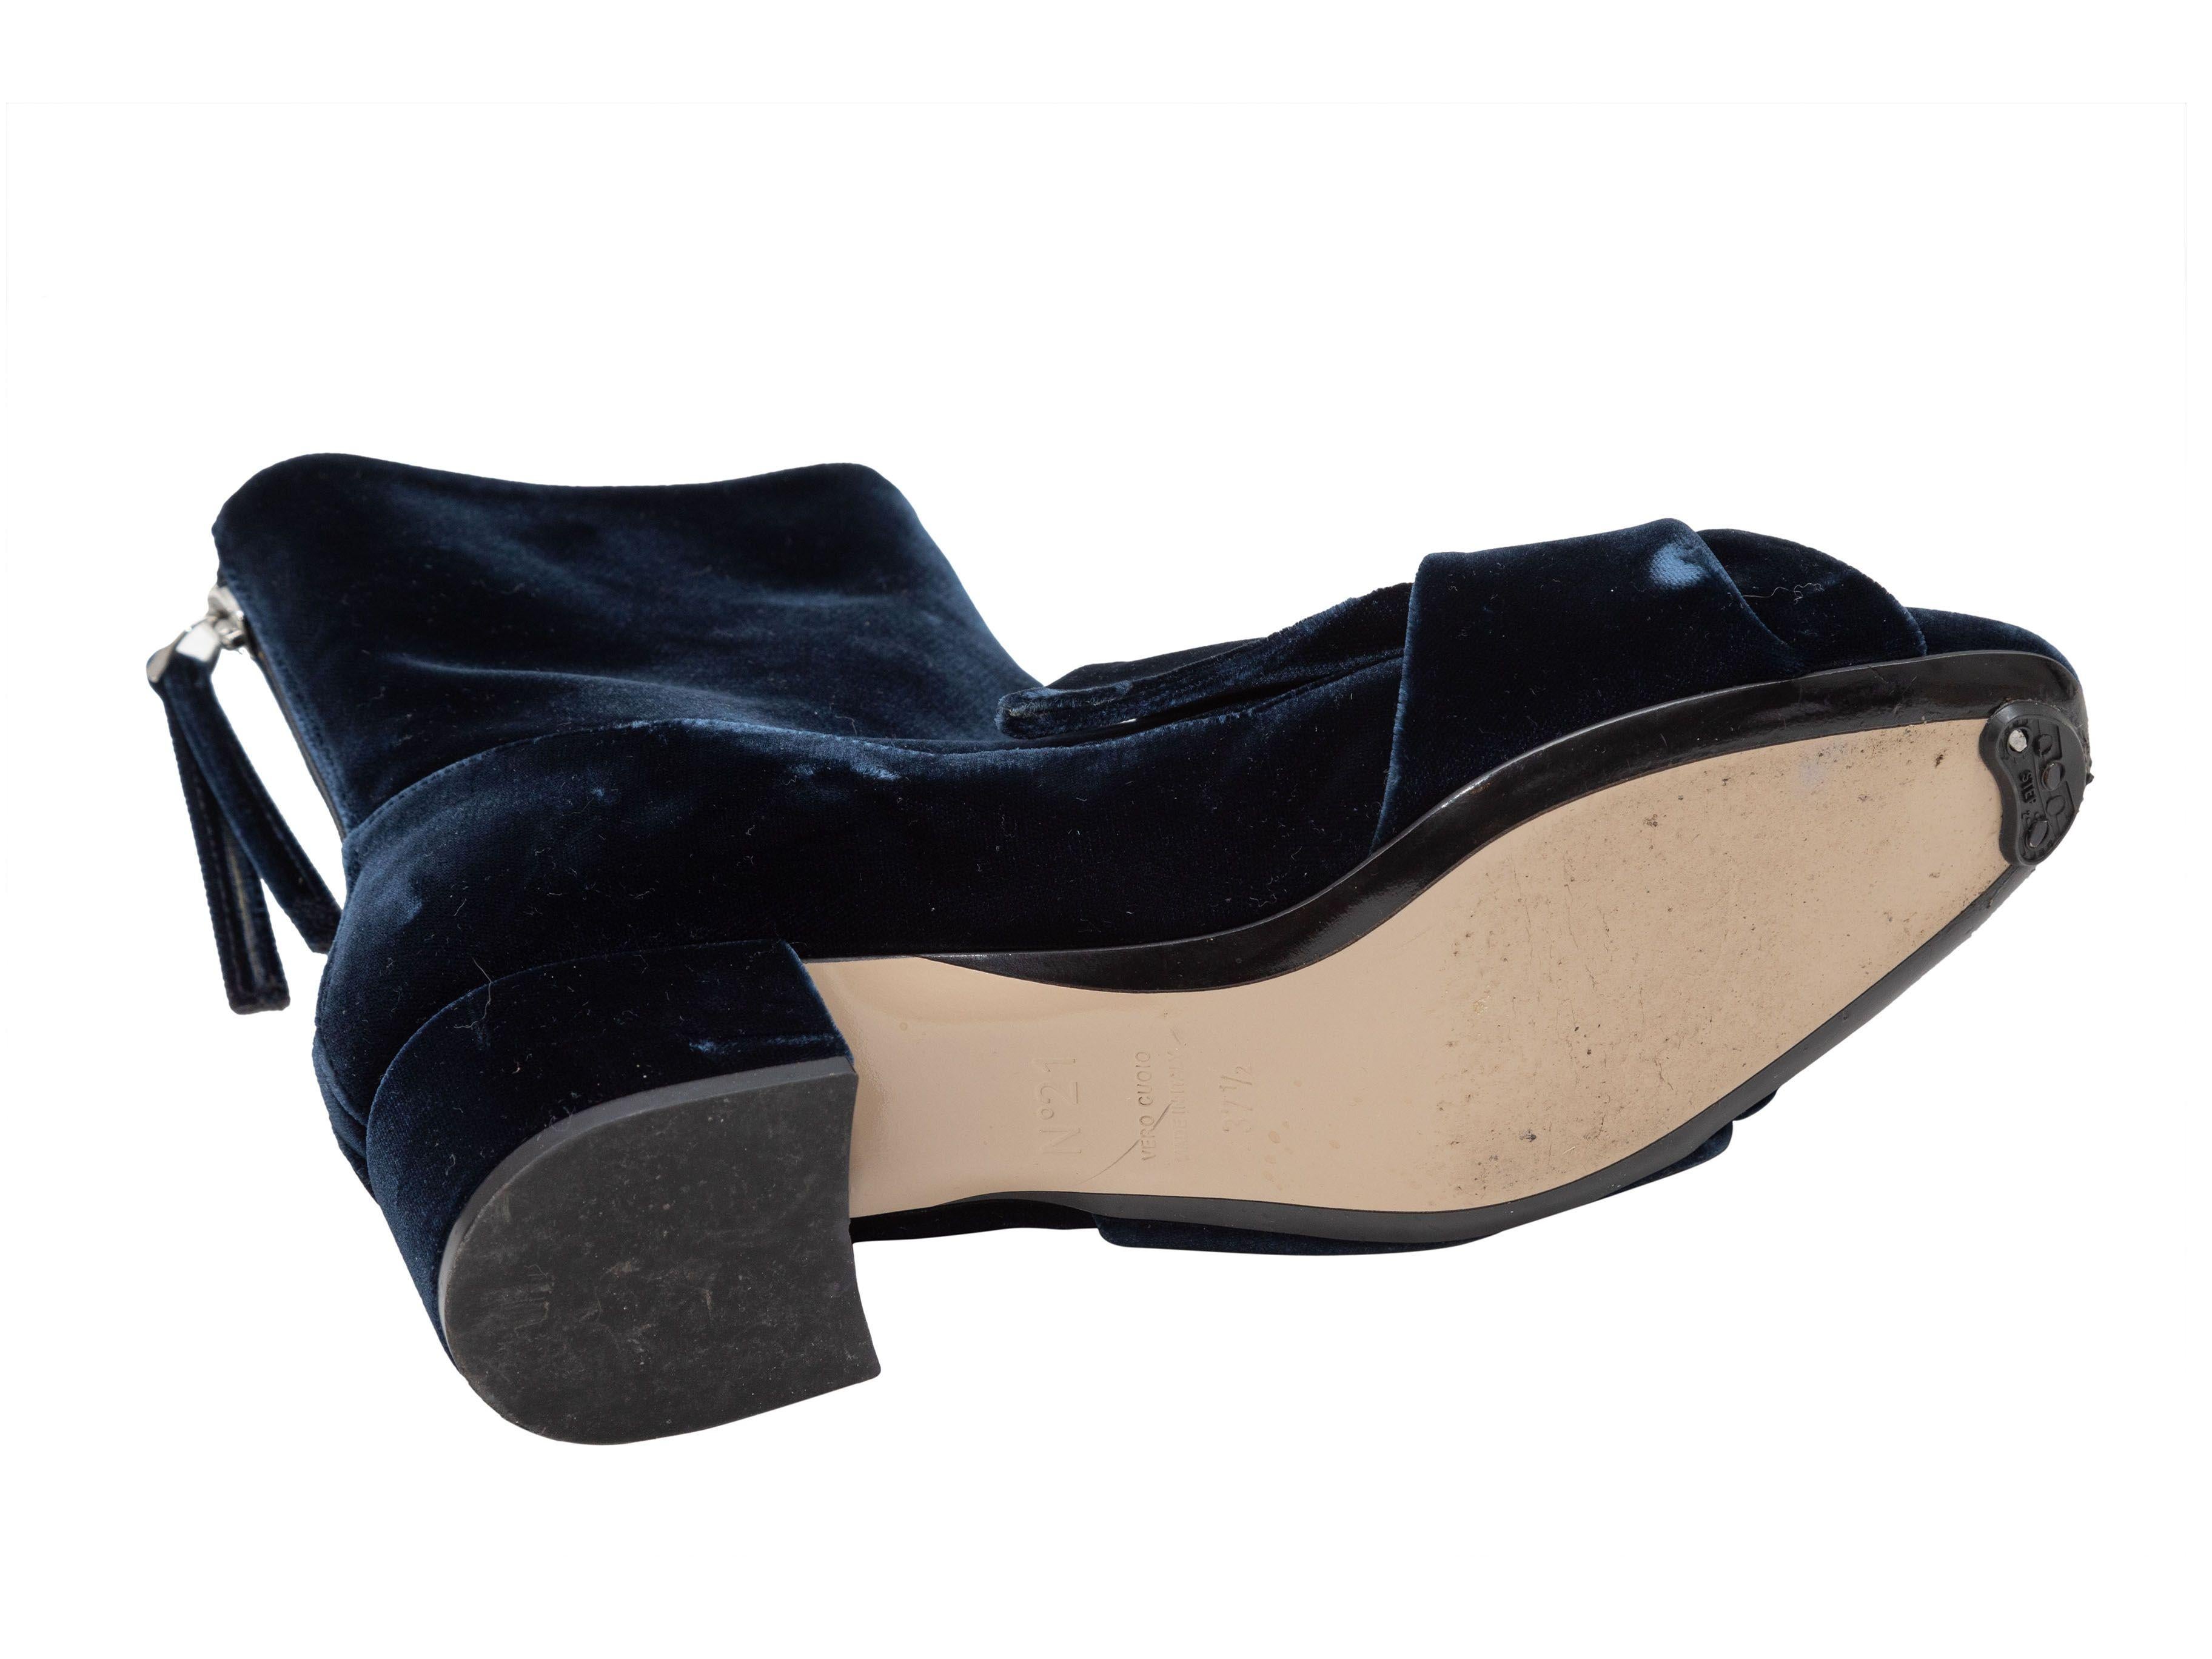 Product Details: Navy velvet ankle boots by N21. Ruffle accents at tops. Block heels. Zip closures at counters. 2